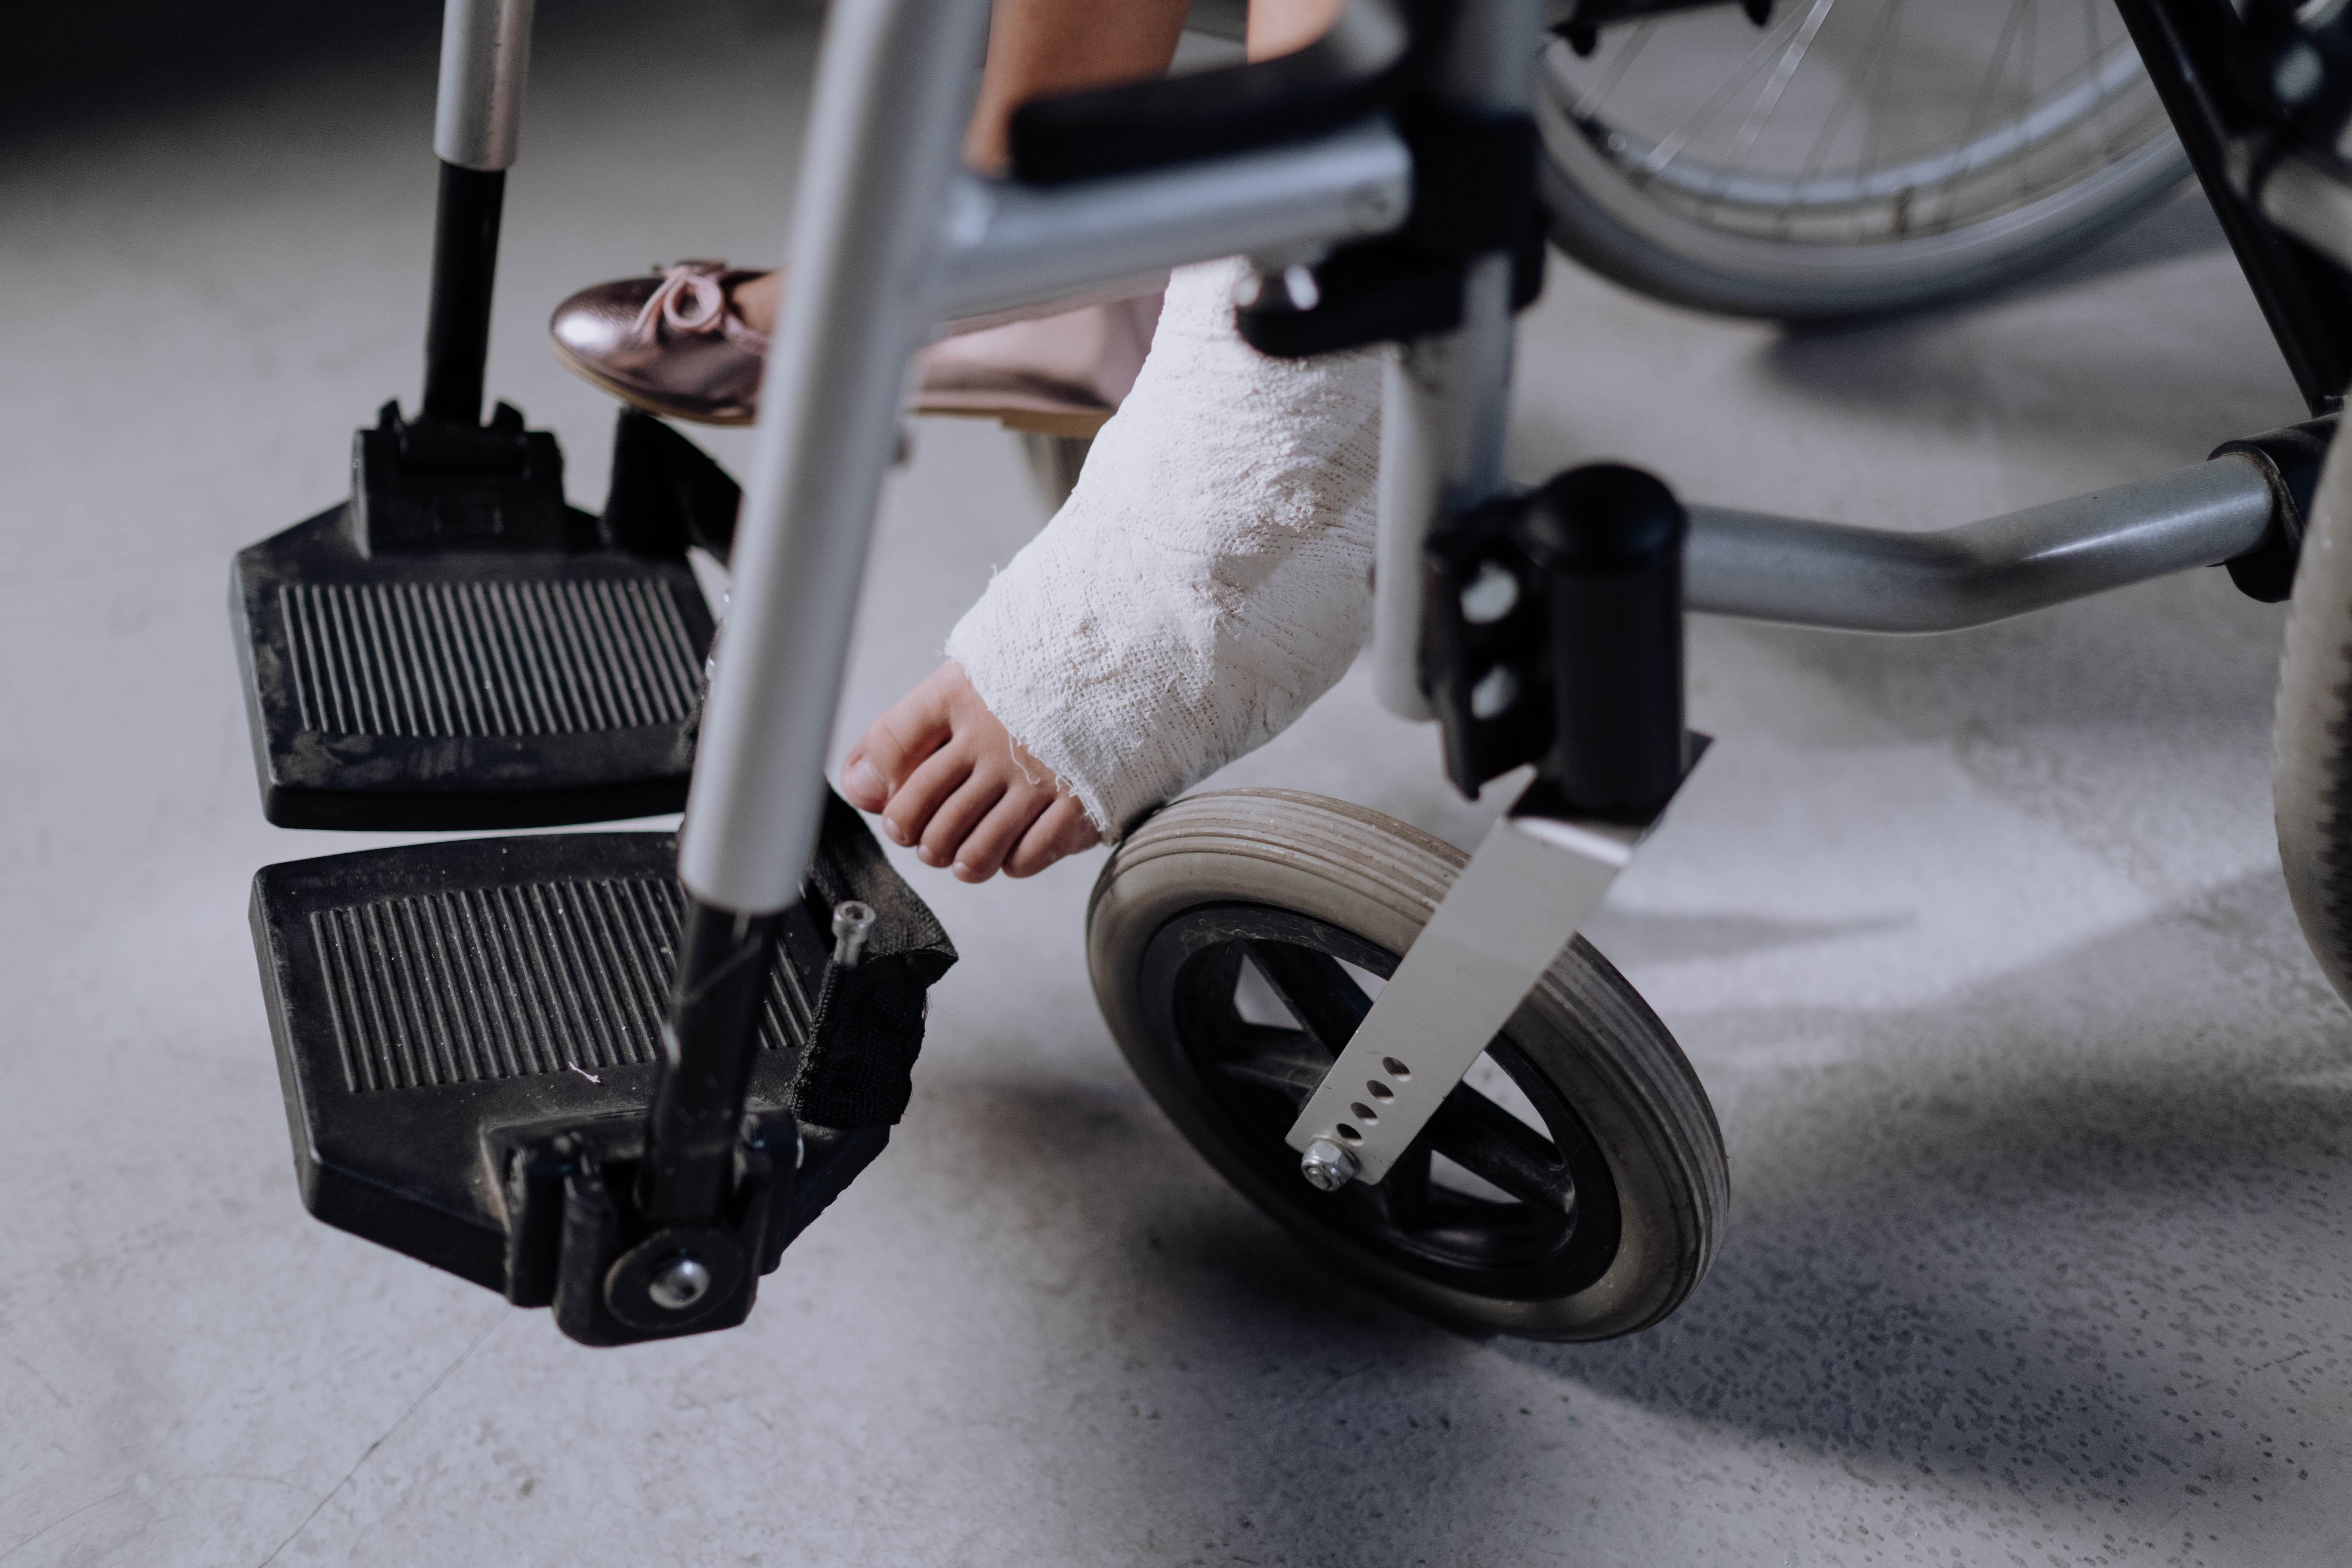 Girl with cast in wheelchair; image by Cottonbro, via Pexels.com.